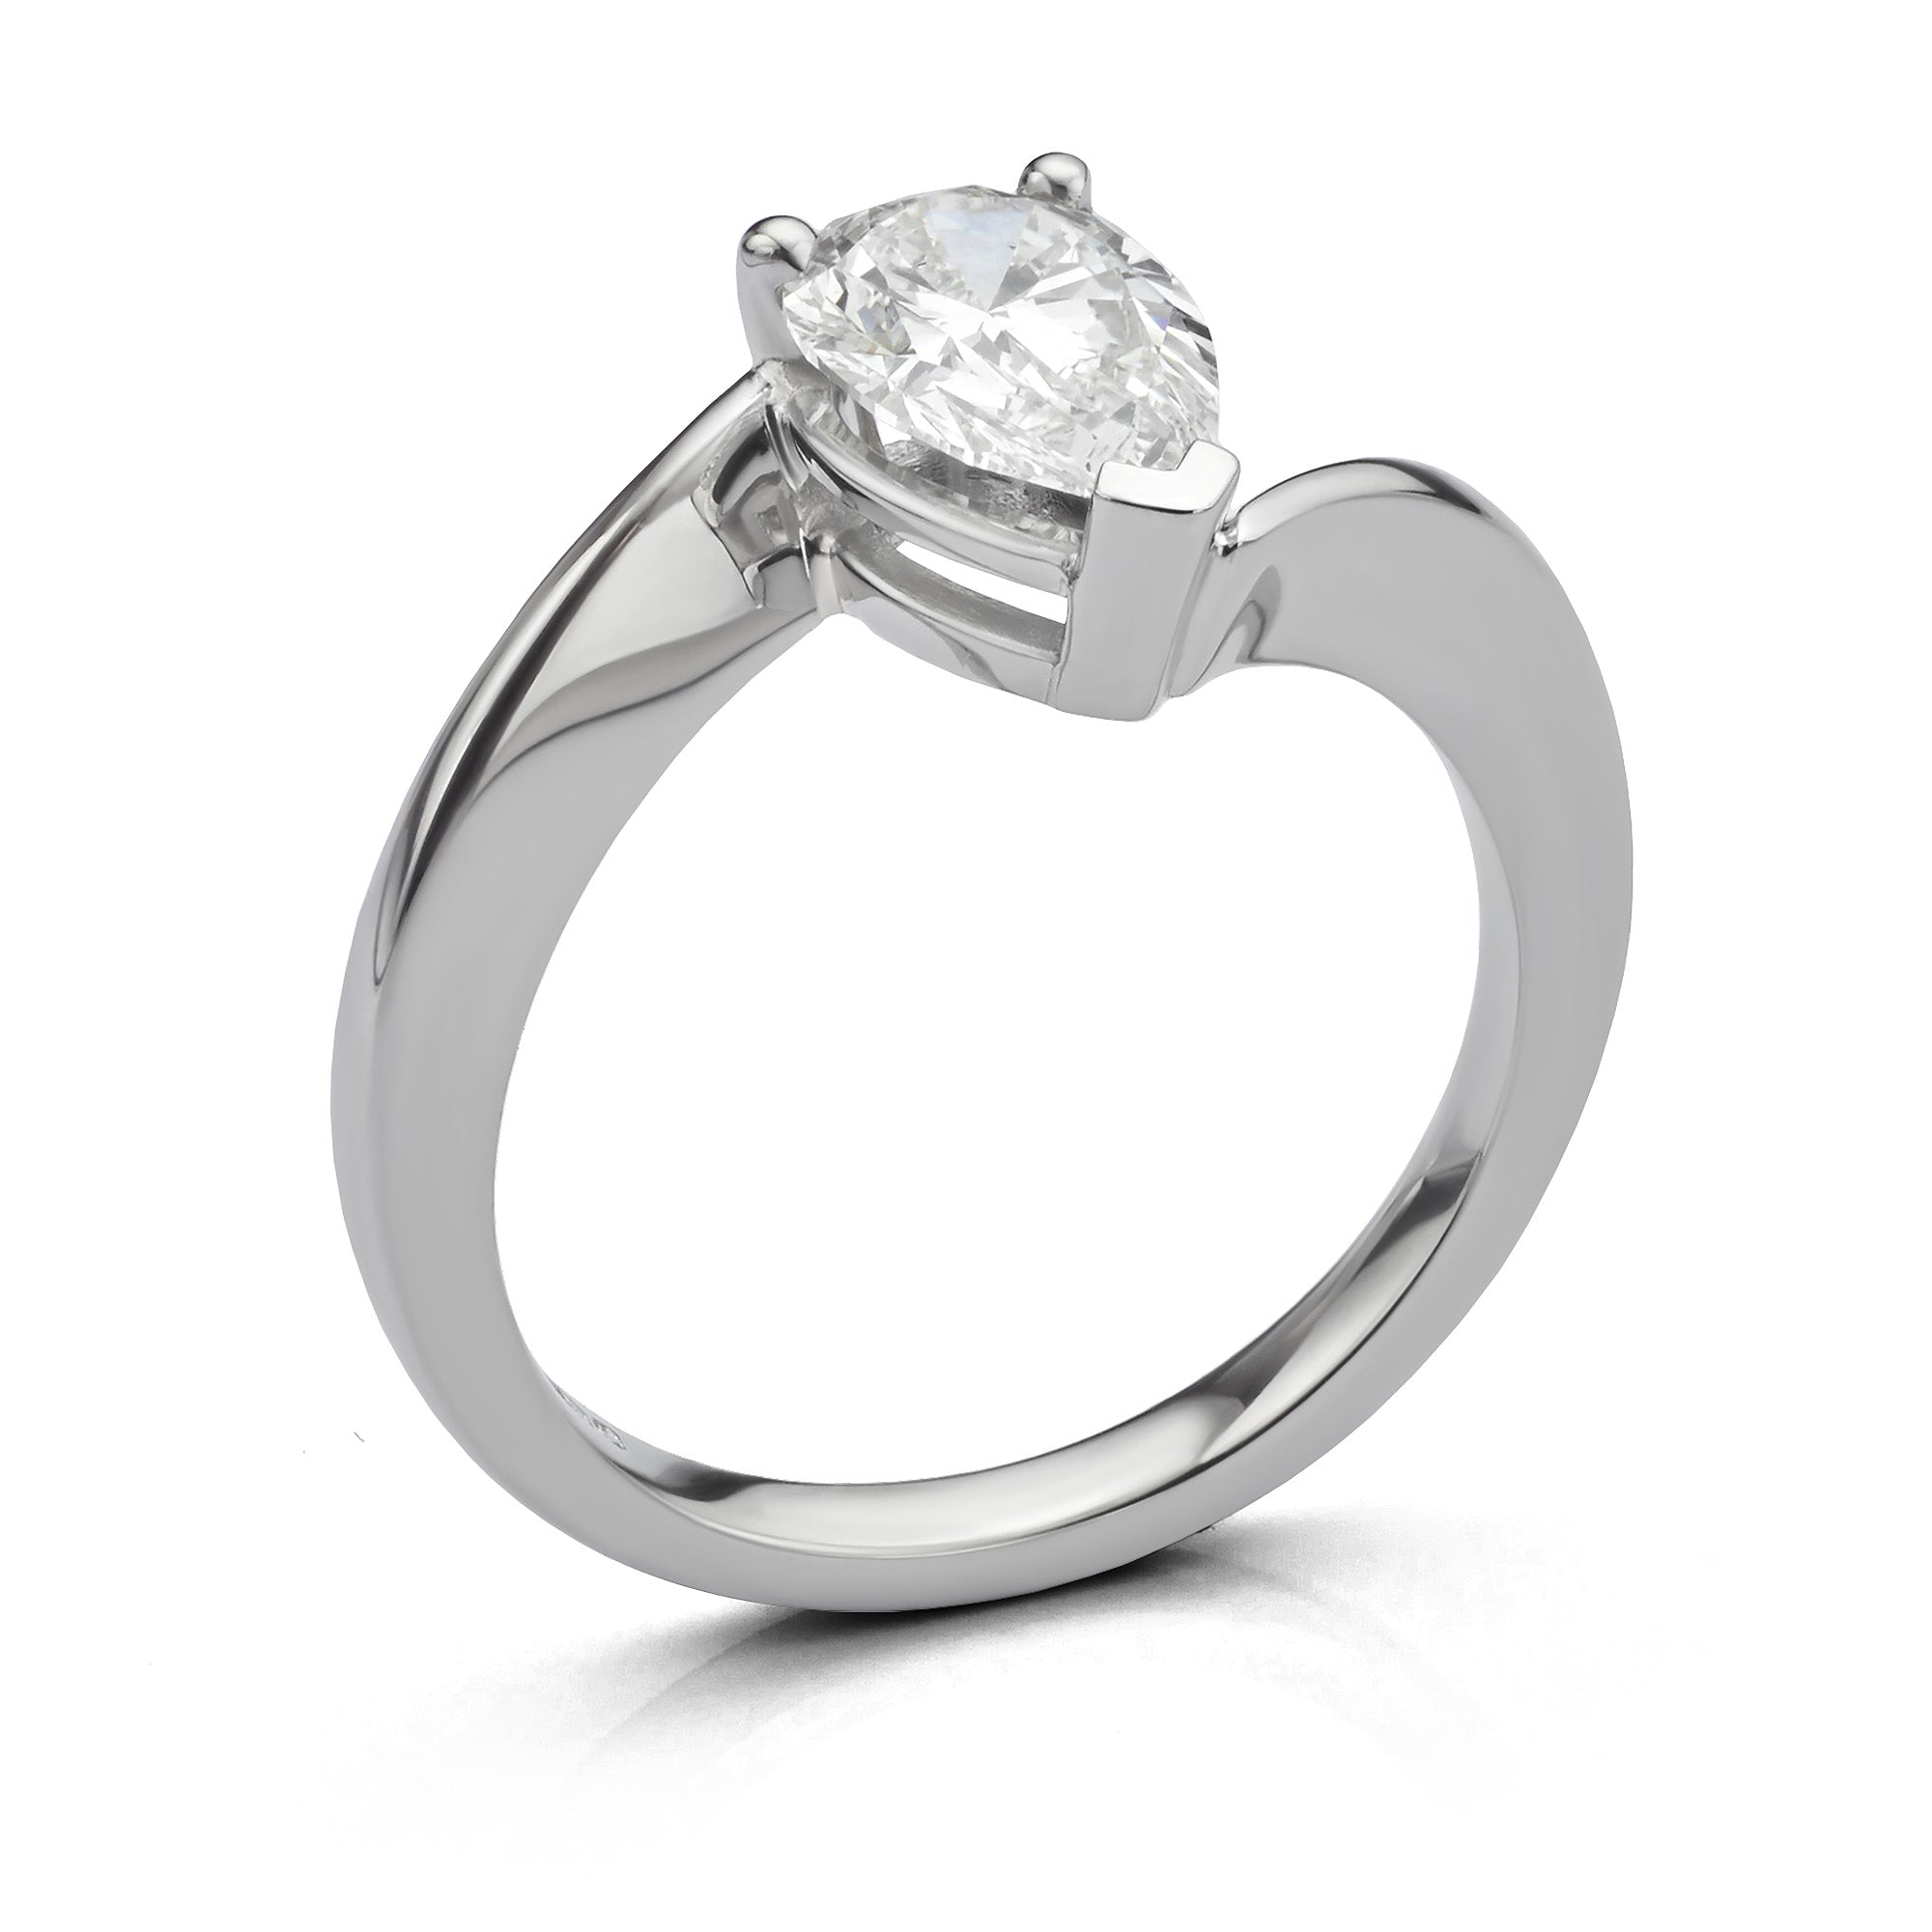 Pear shaped lab-grown diamond engagement ring side view